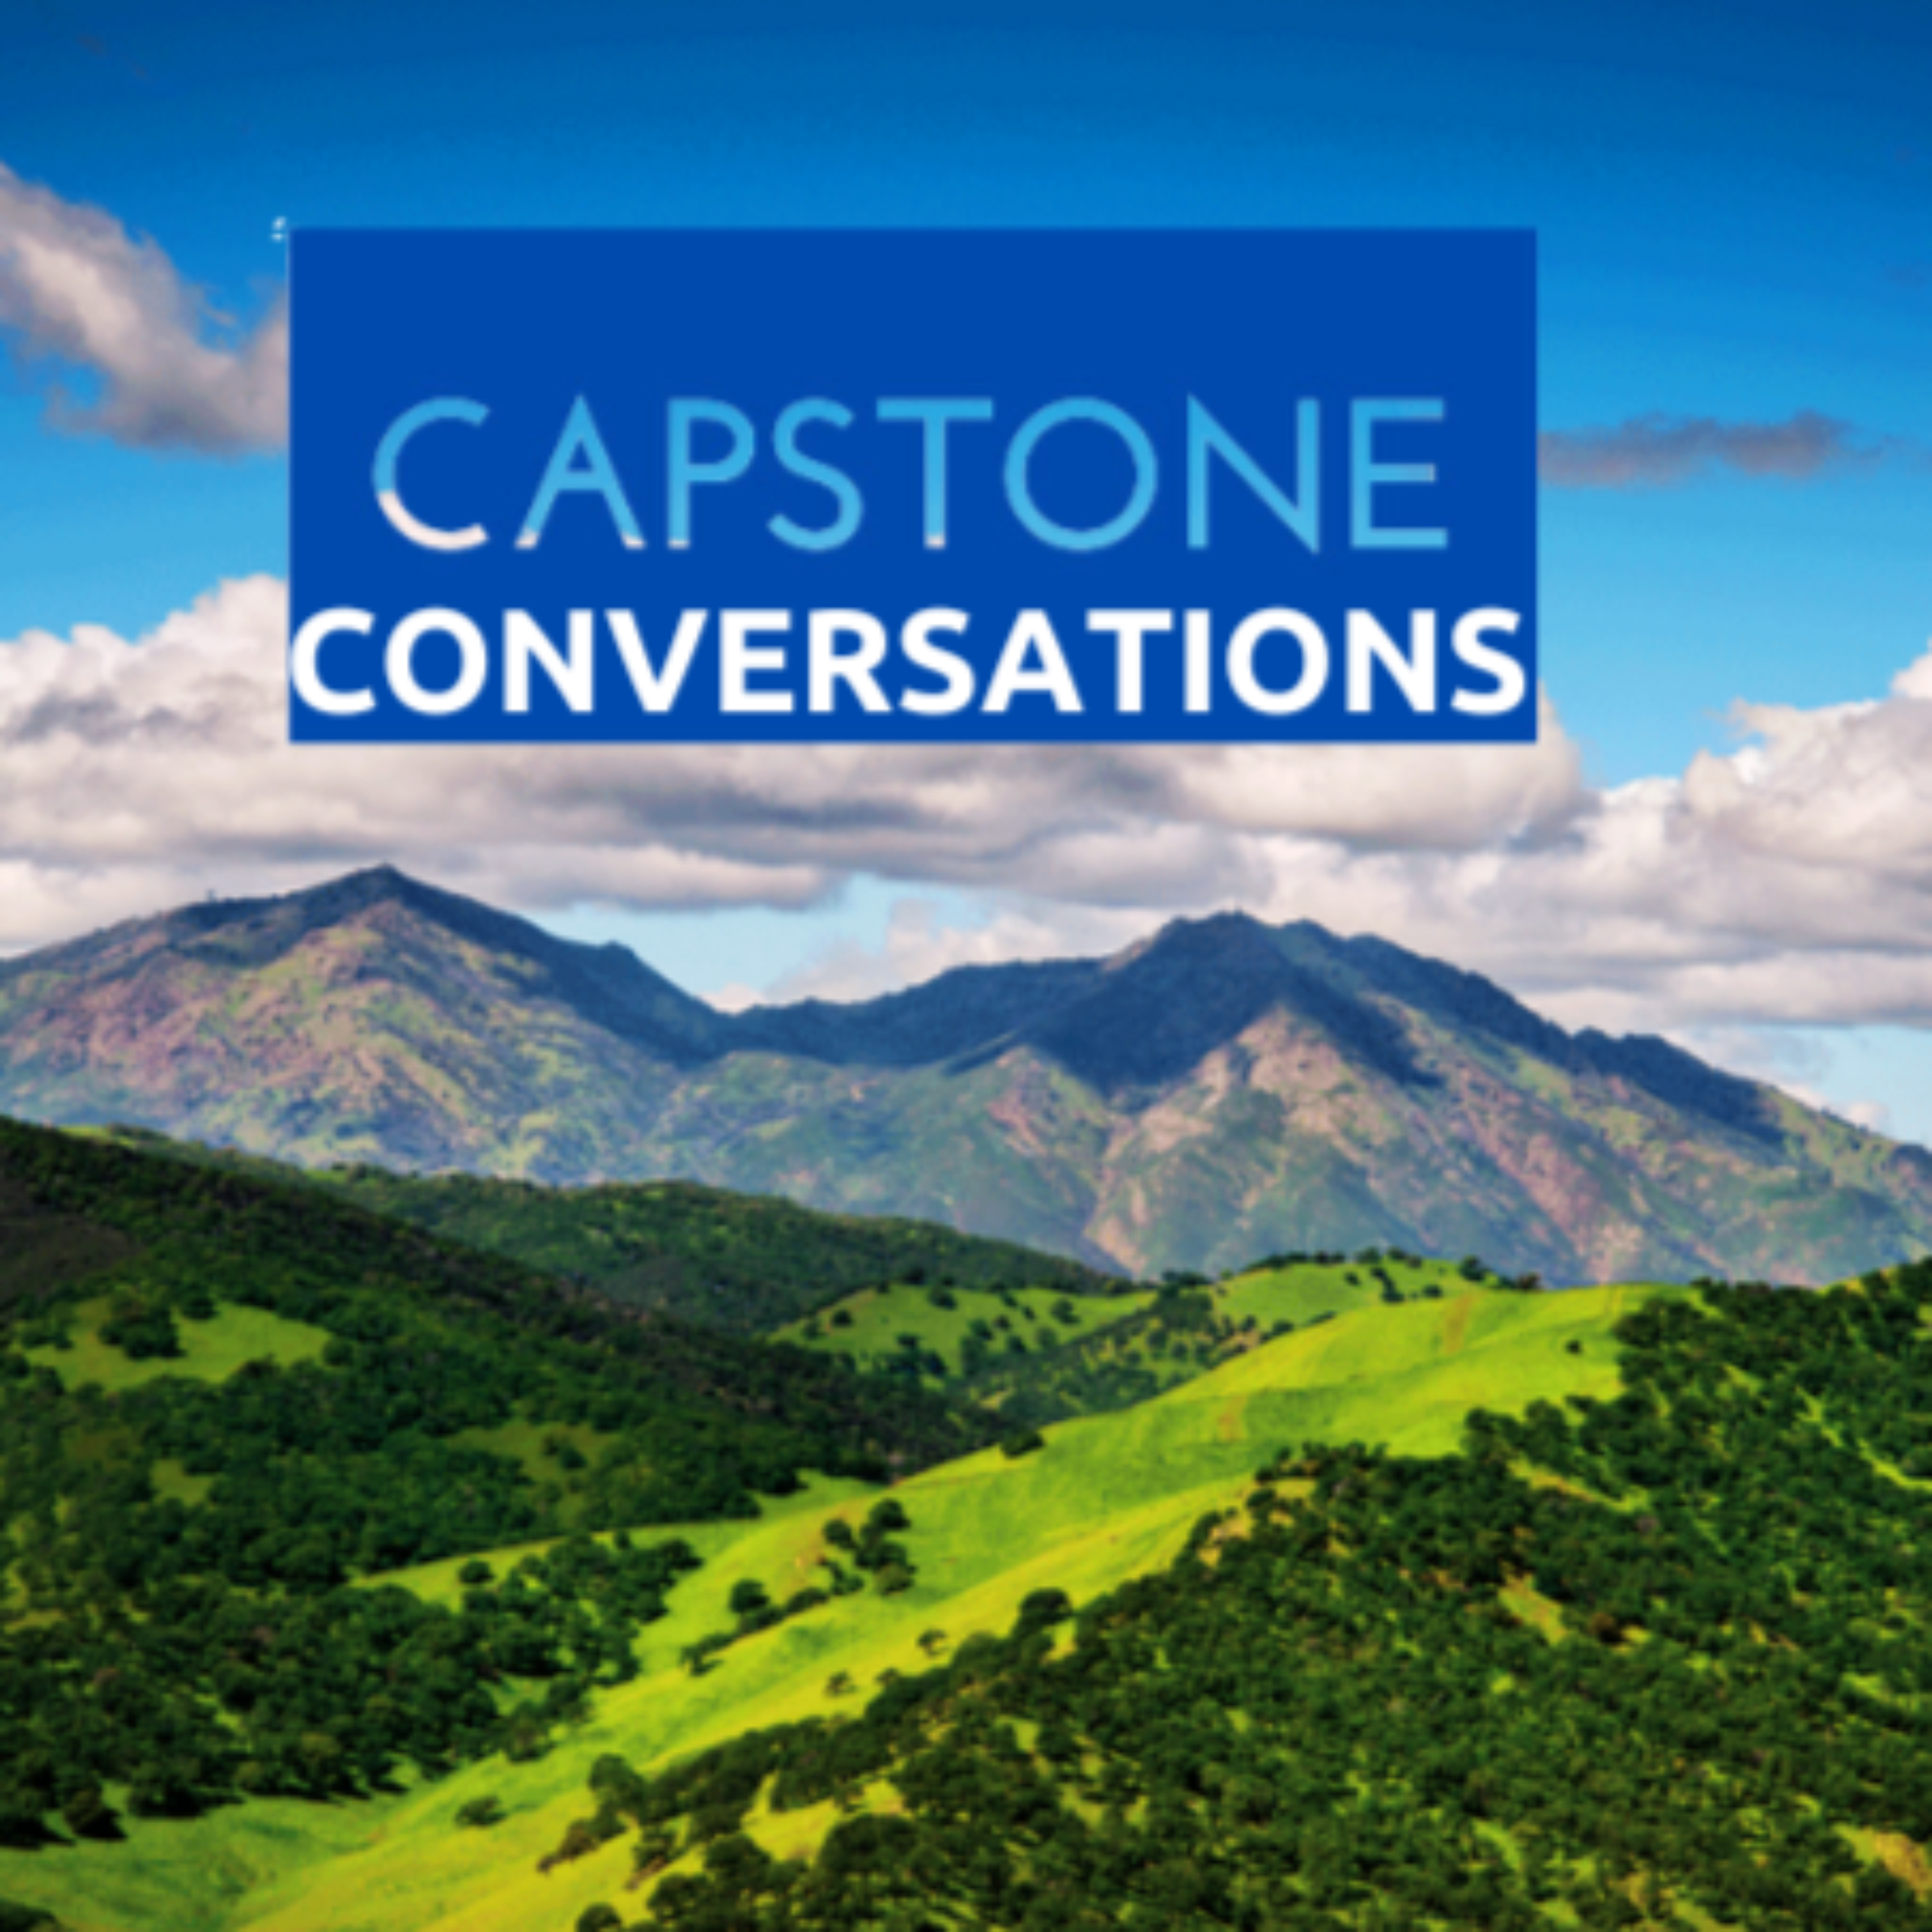 Capstone's Jared Asch Welcomes Loella Haskew and Cindy Darling of Walnut Creek